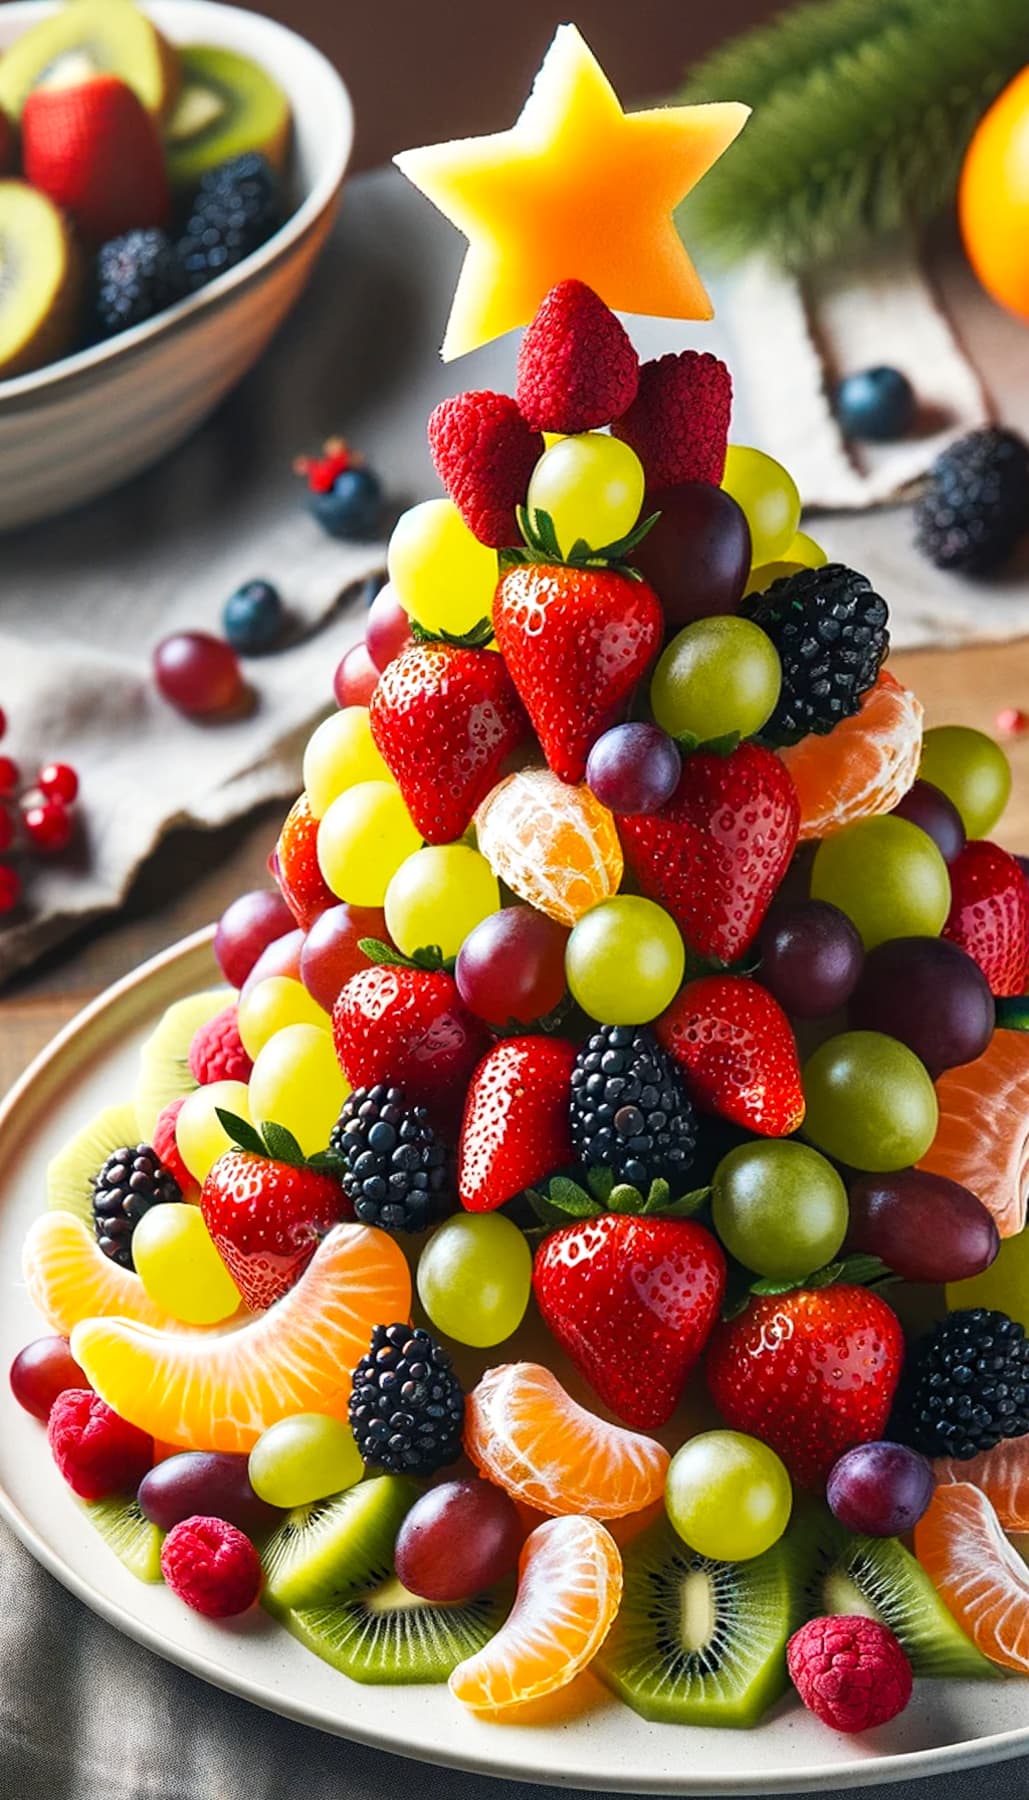 Edible Christmas tree made with strawberries, grapes, oranges, kiwi, and more.